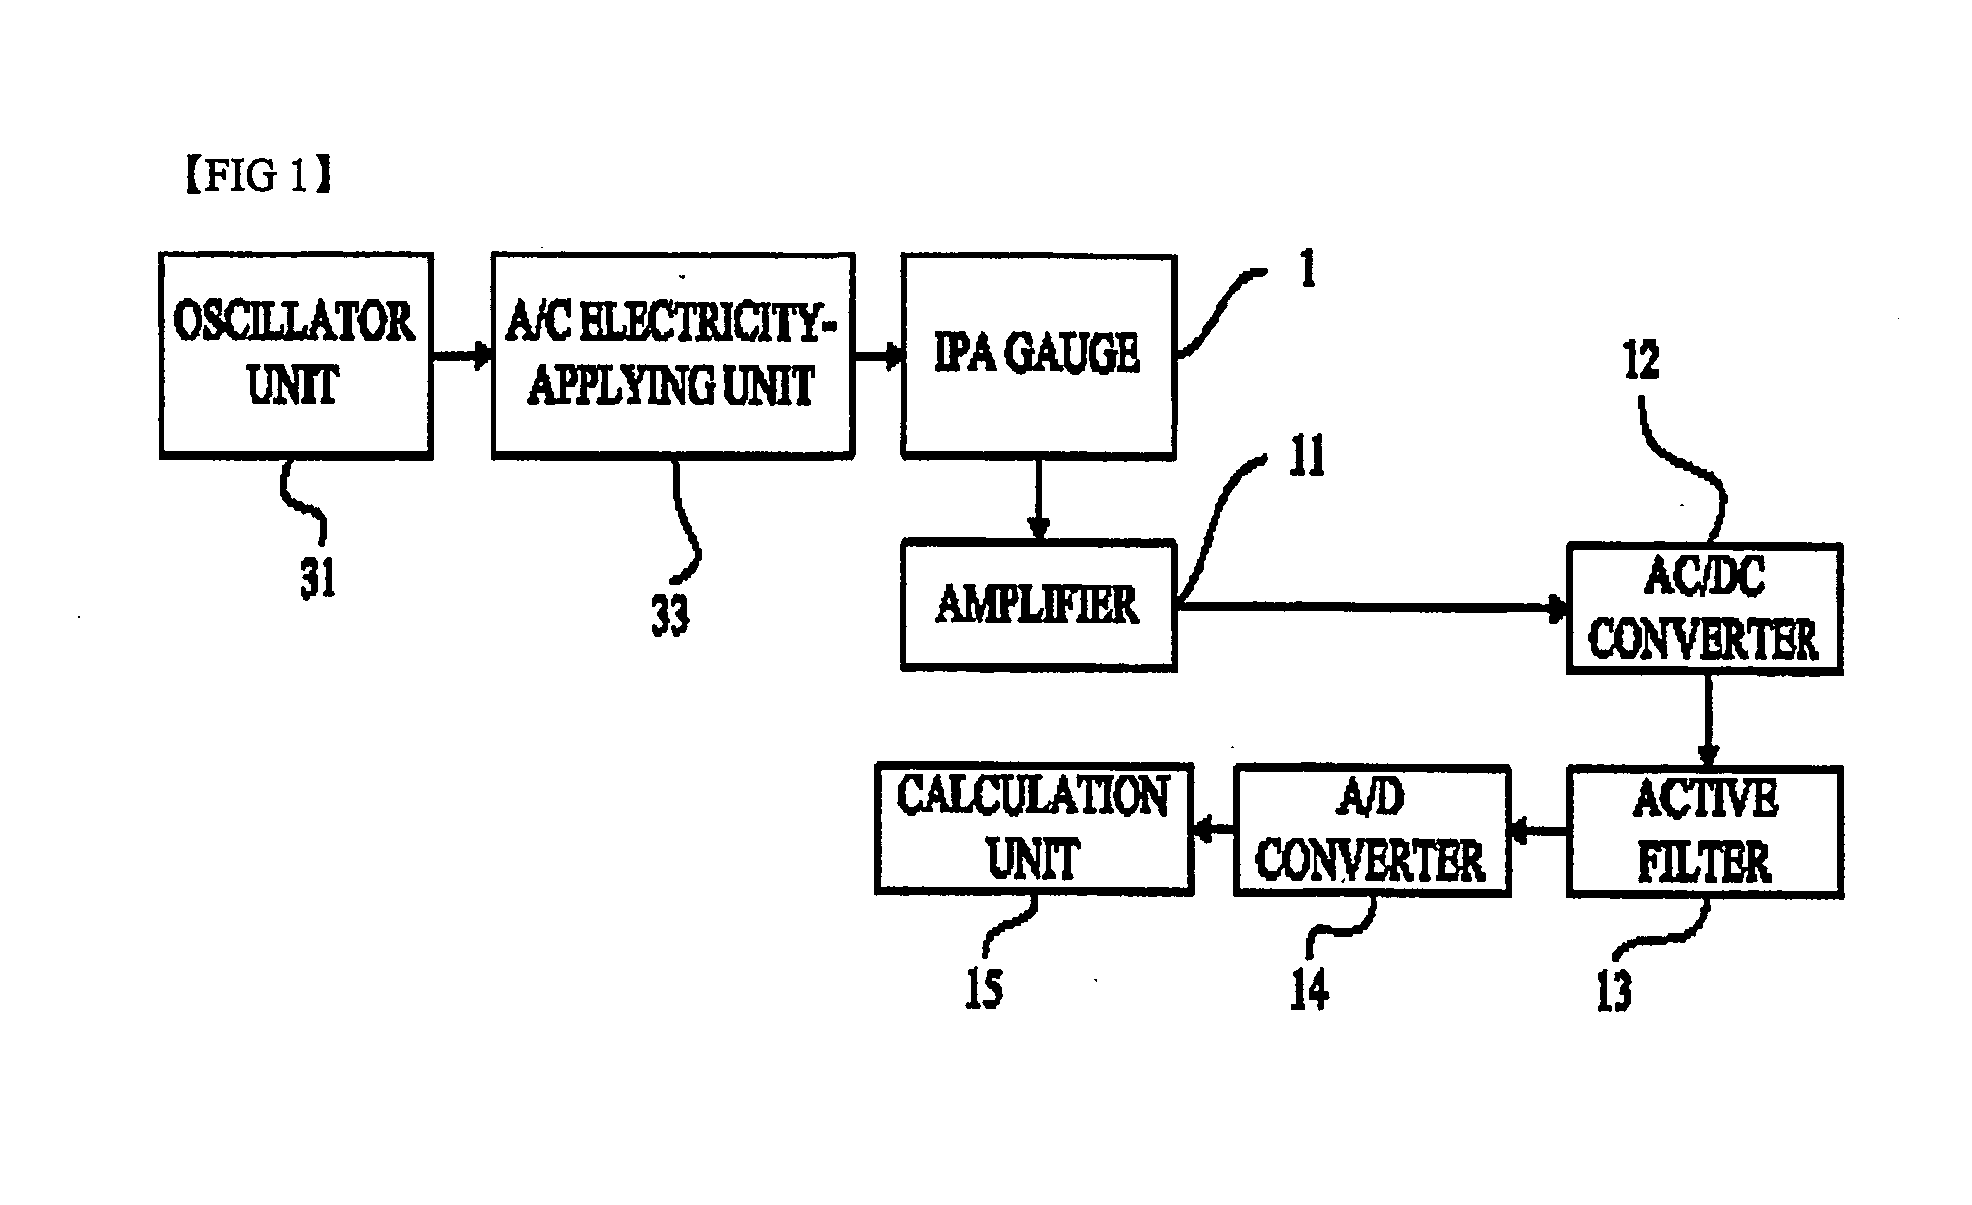 Load measuring transducer including elastic structure and gauge using induced voltage, and load measuring system using the same